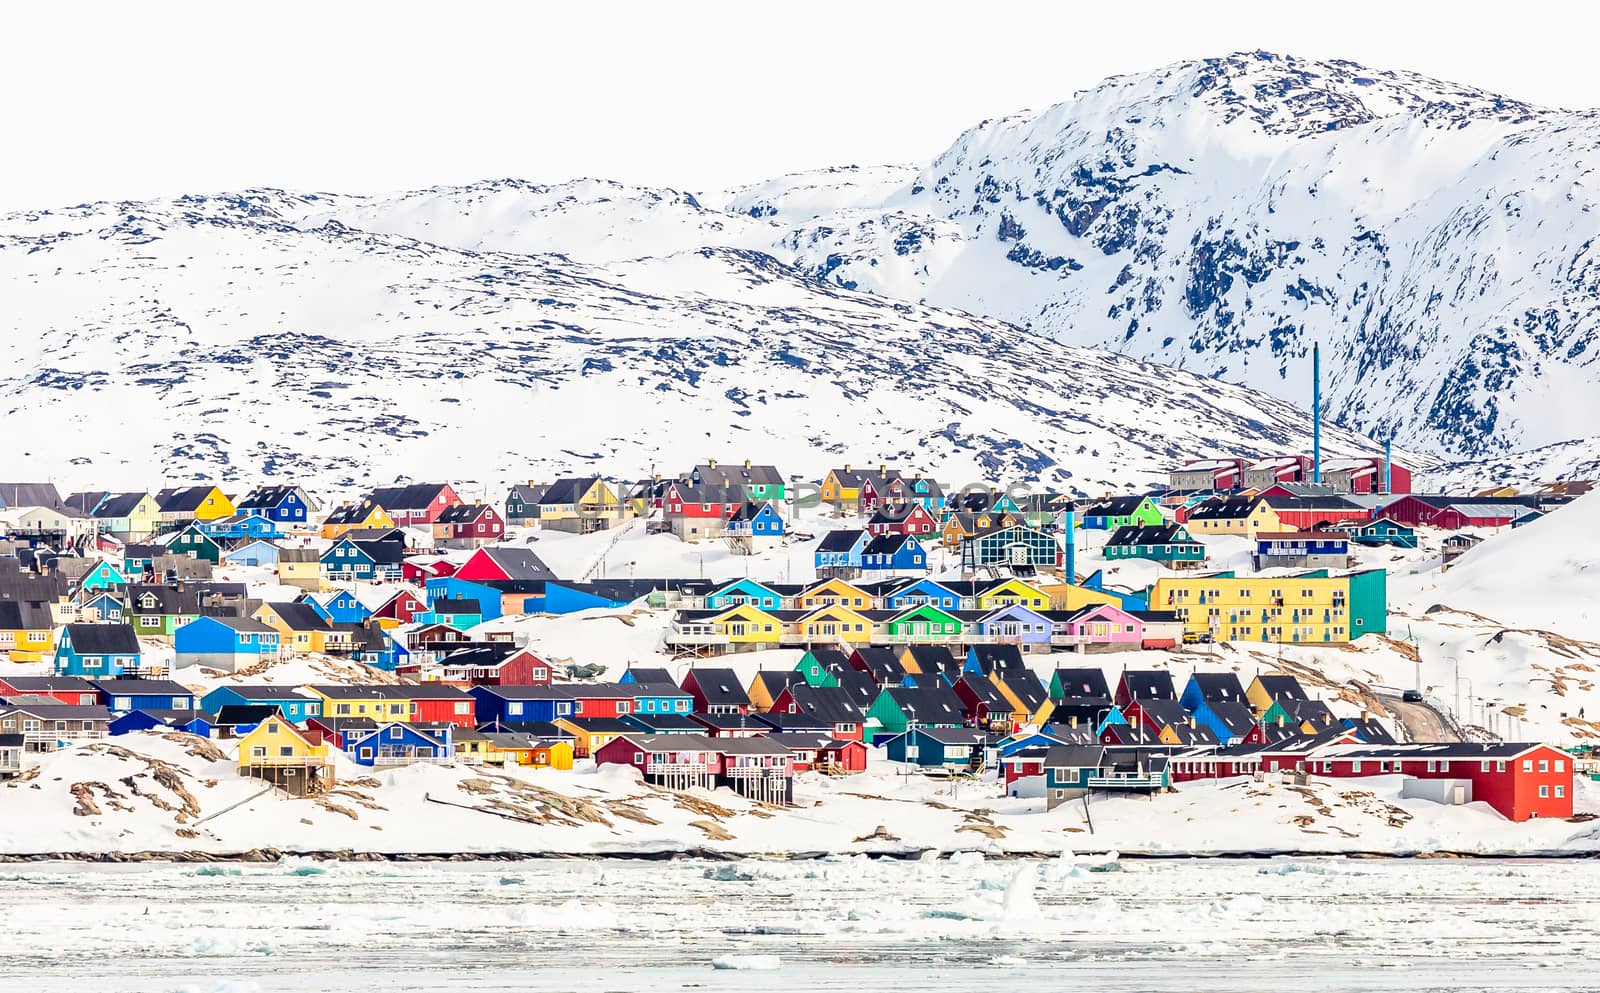 Arctic city panorama with colorful Inuit houses on the rocky hills covered in snow with snow and mountain in the background, Ilulissat, Greenland